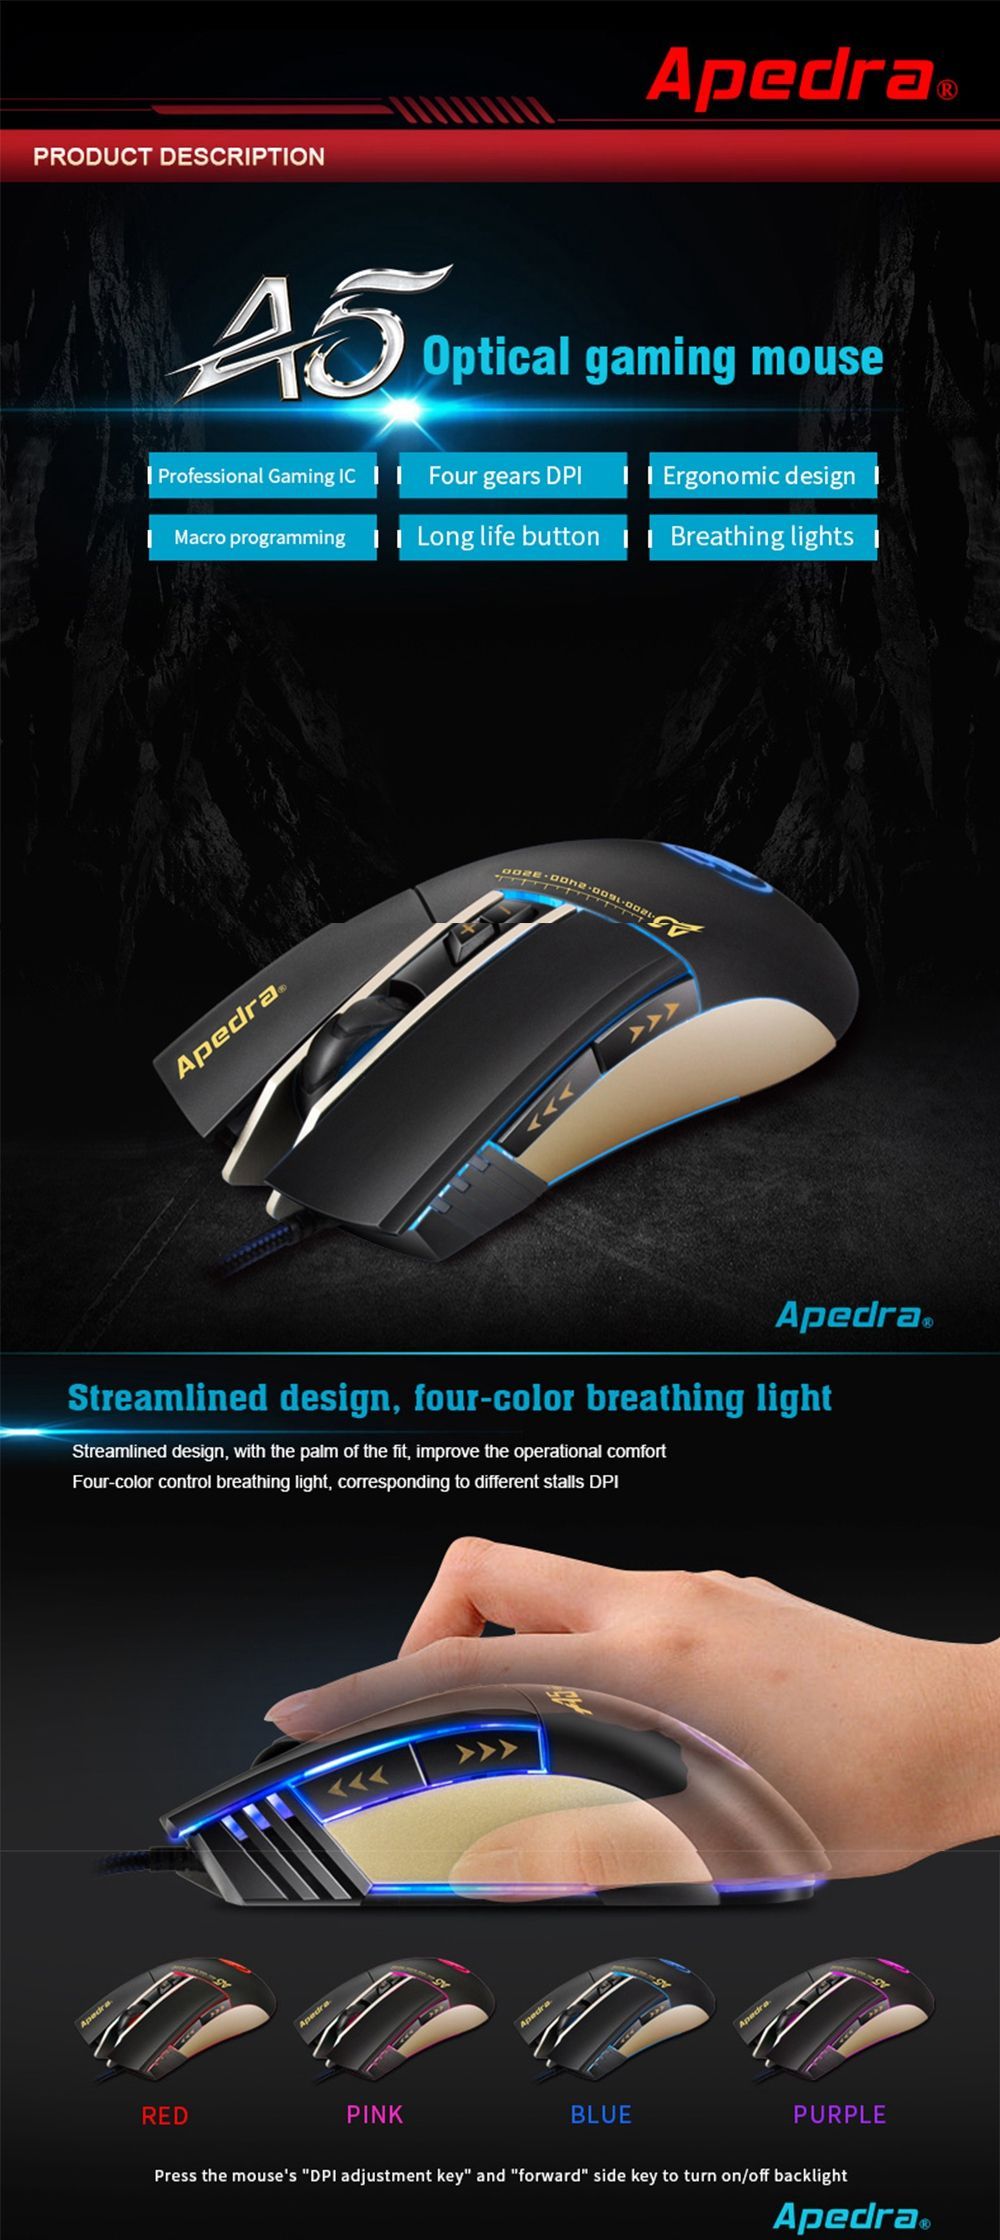 APEDRA-A5-USB-Wired-3200DPI-7-Buttons-LED-4-Color-Controllable-Breathing-Light-Optical-Gaming-Mouse-1576635